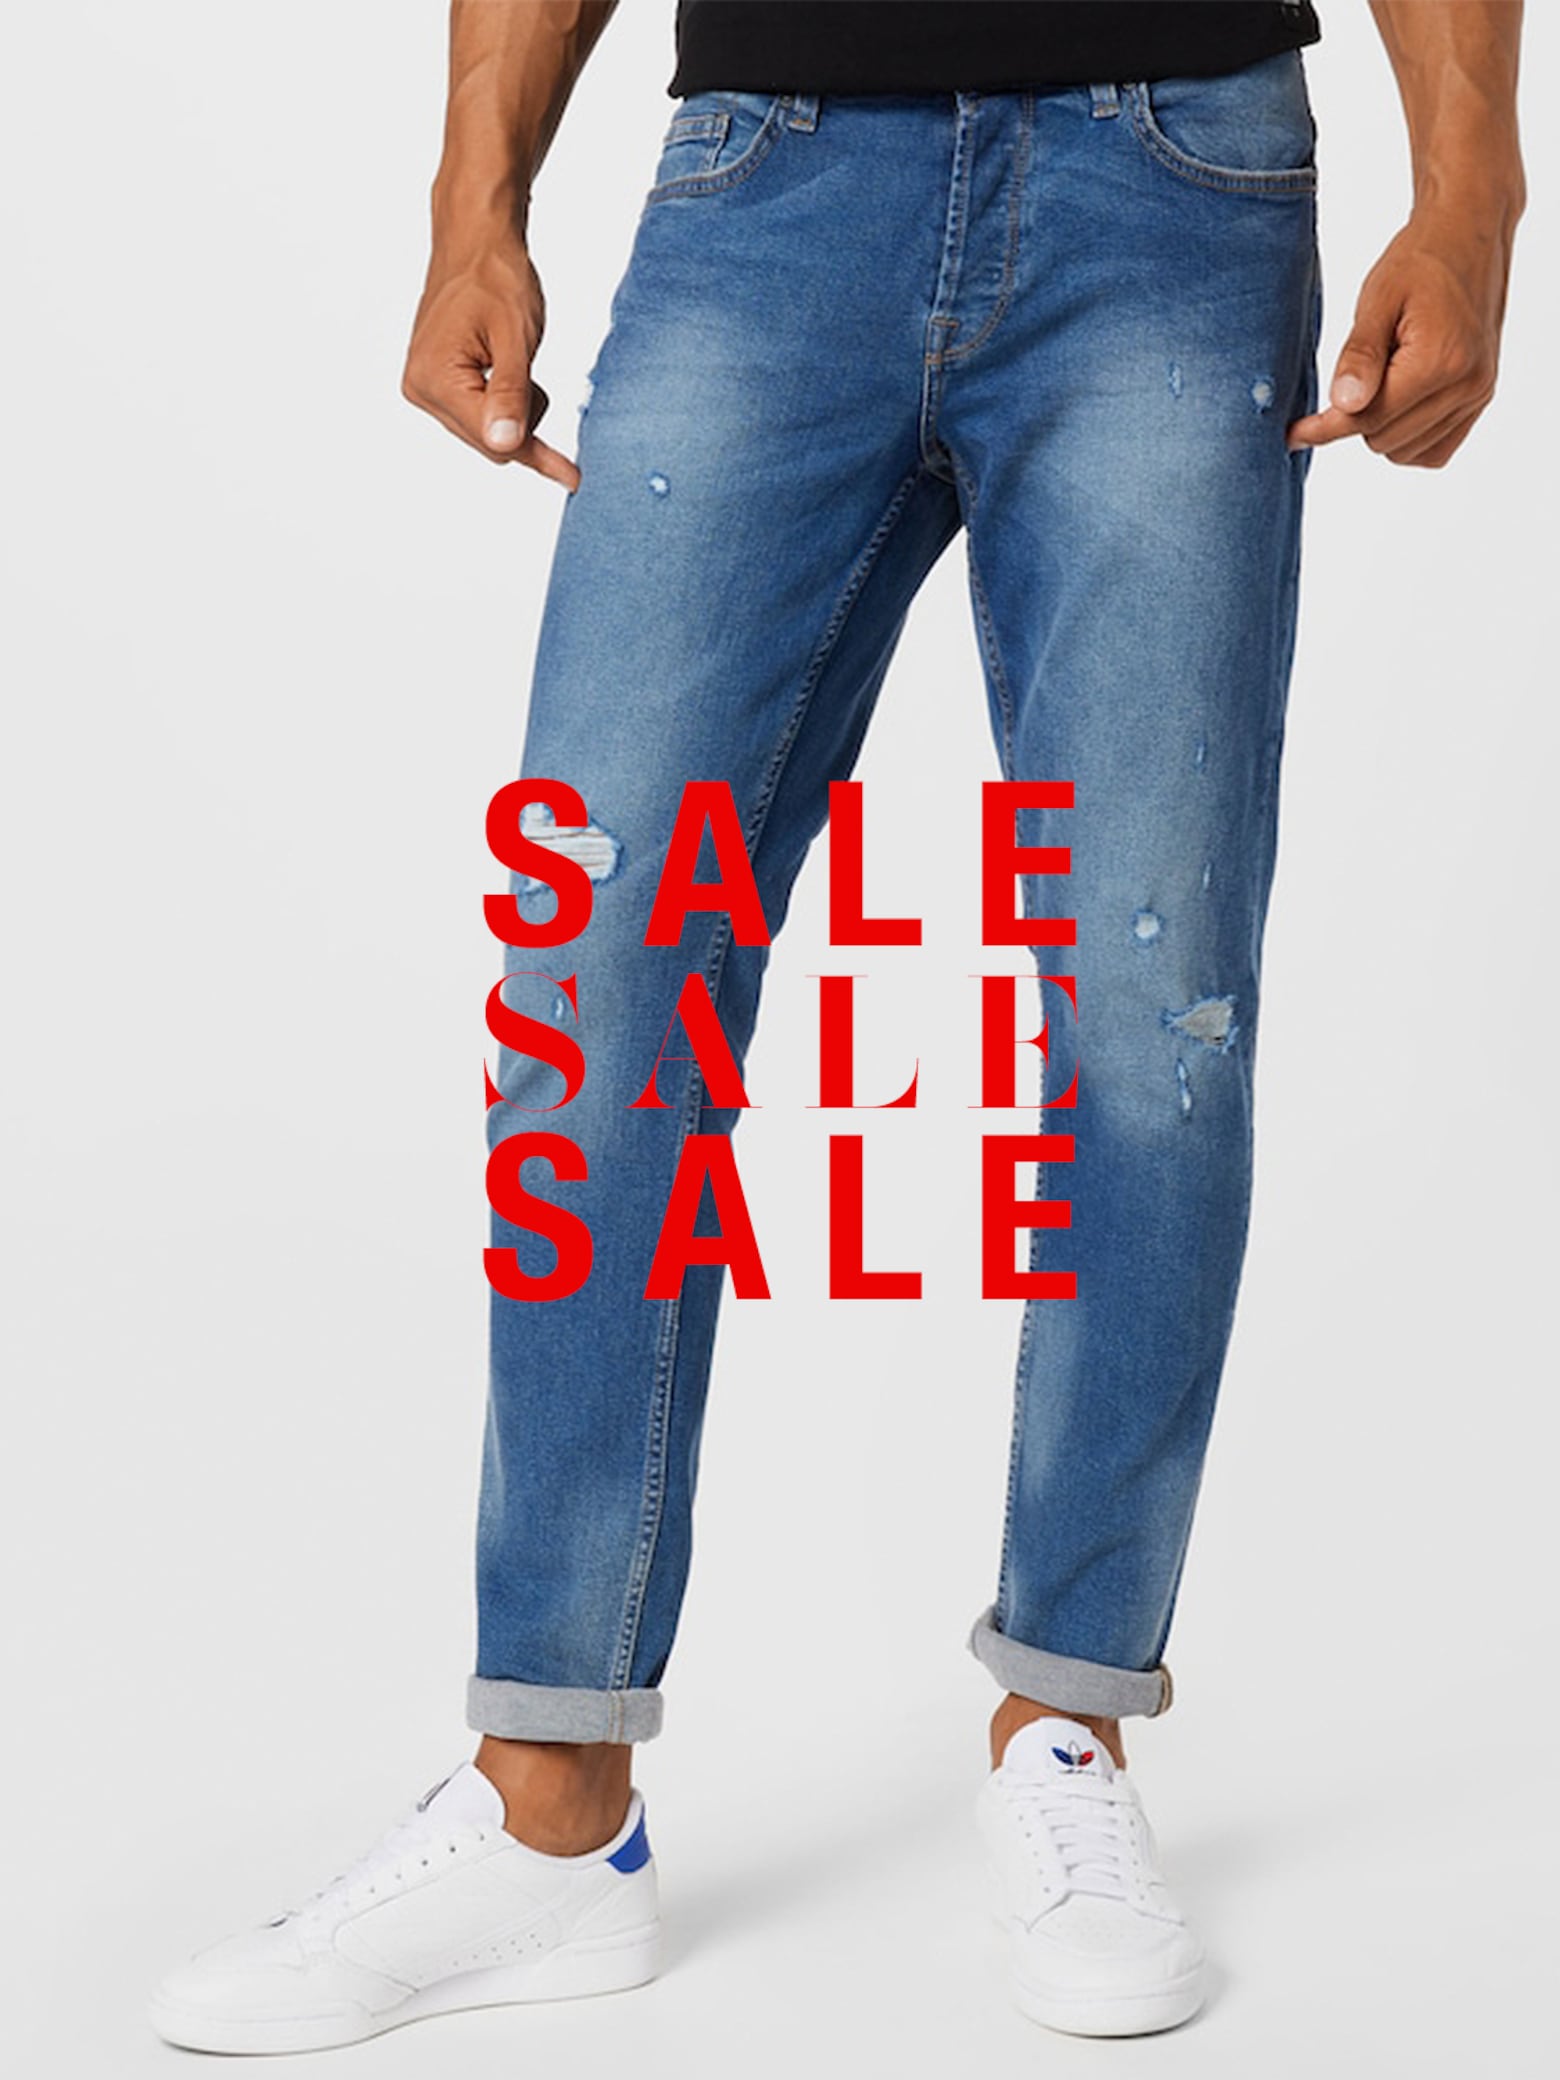 Save now! Jeans